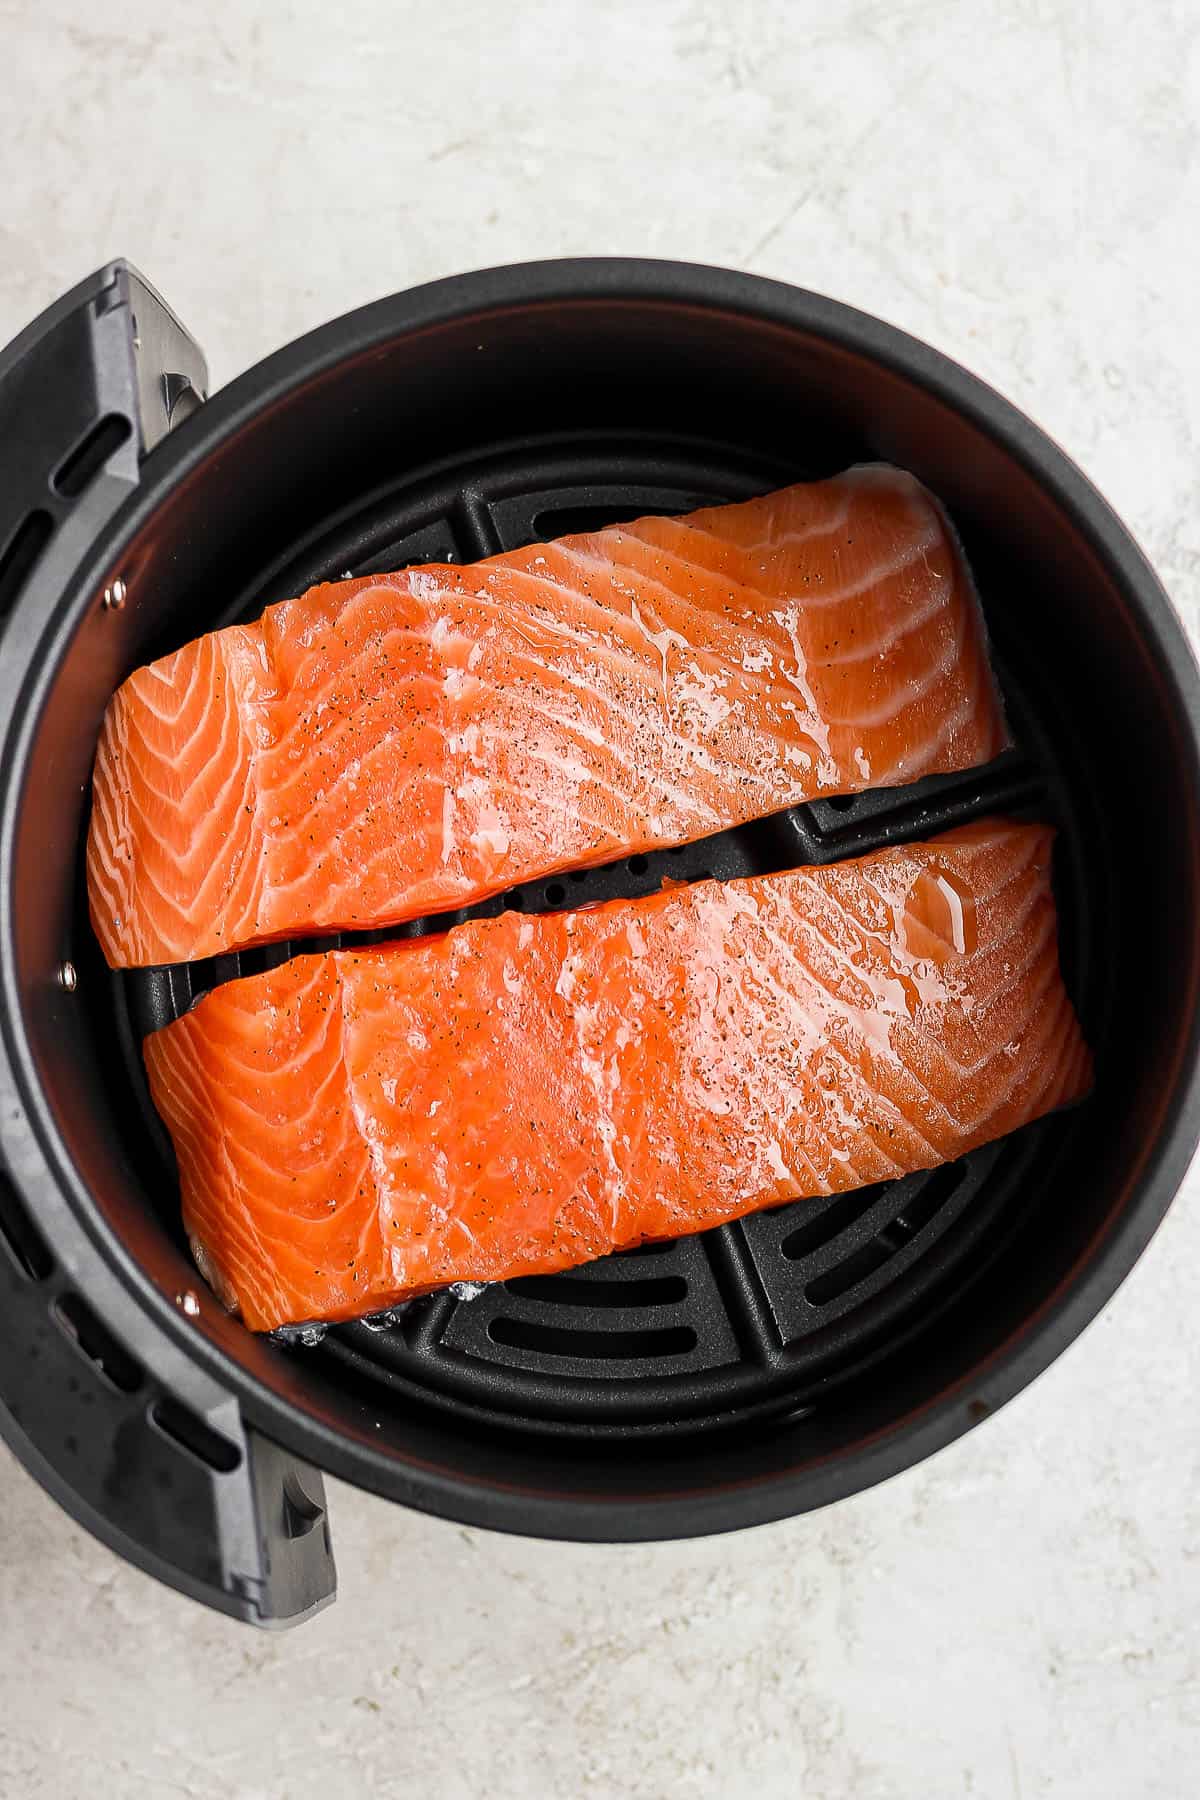 Salmon fillets in an air fryer basket before cooking.